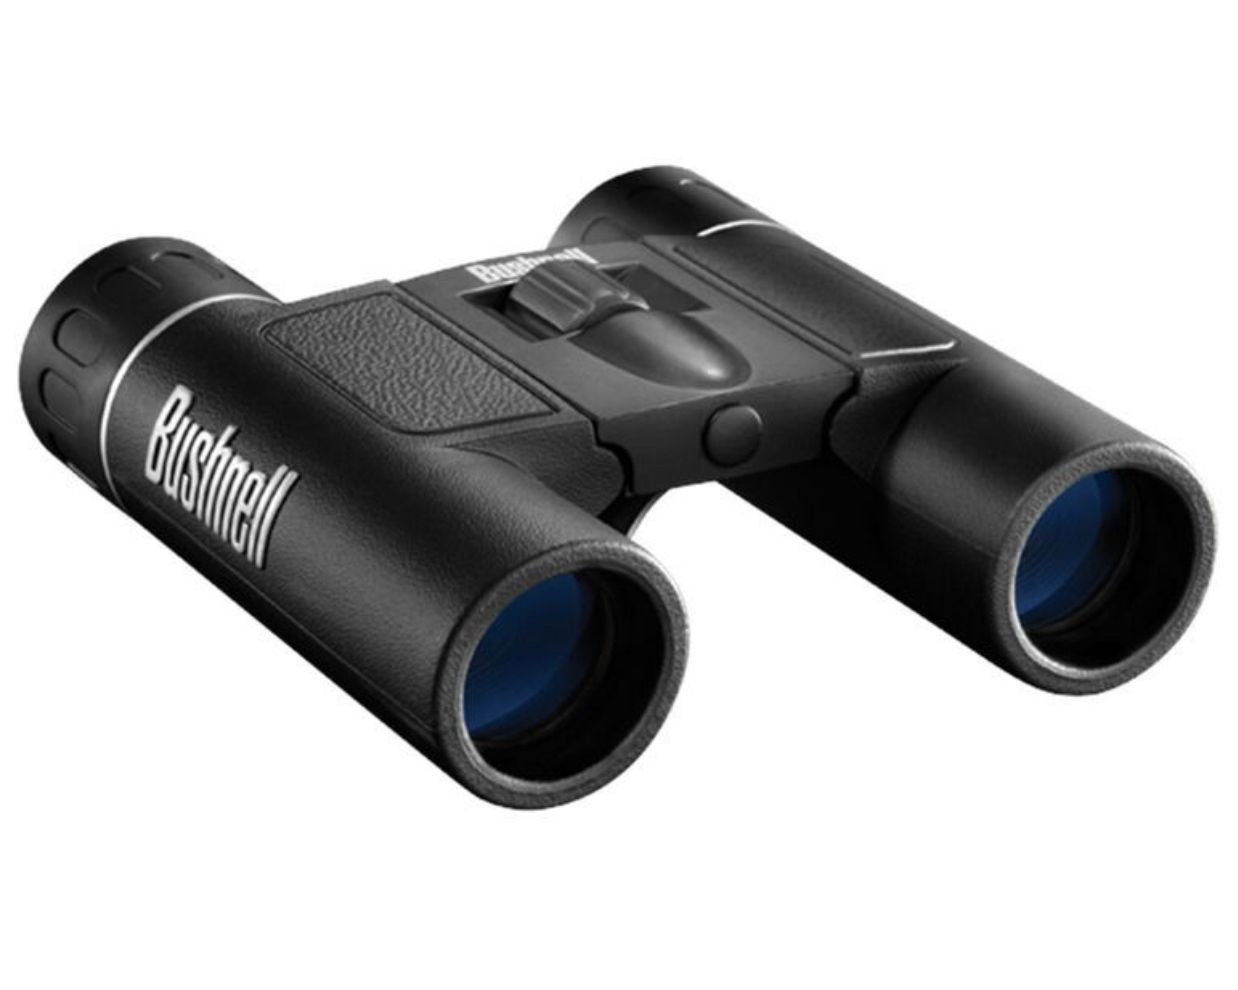 Bushnell Binoculars Powerview Roof Prism Compact 12x25 (131225) - Limited Lifetime Warranty